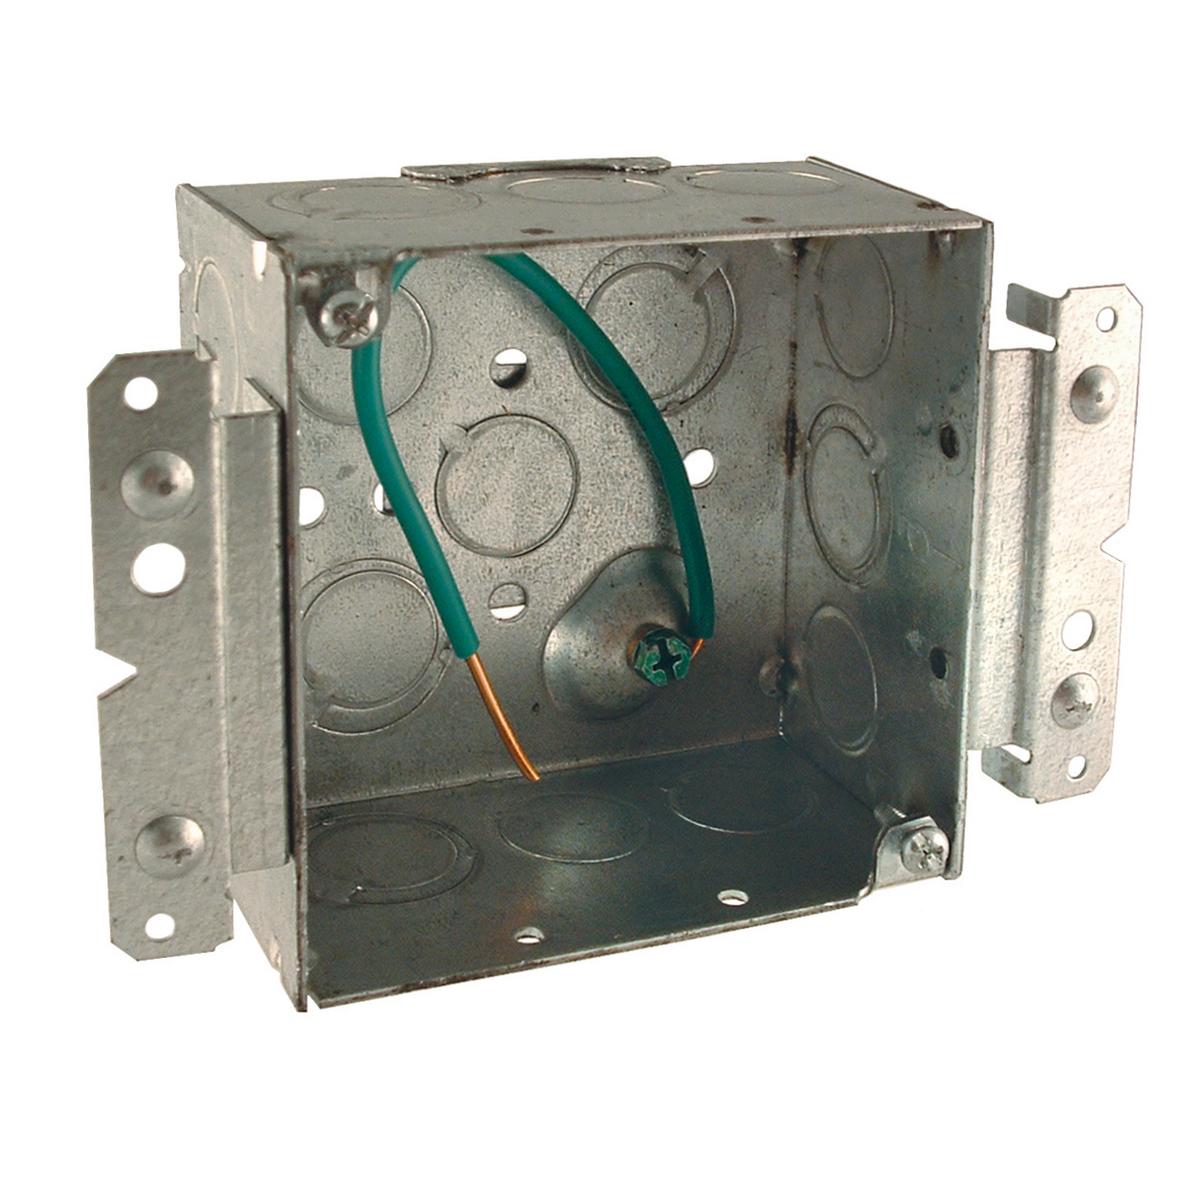 RACO 232M 4" SQUARE BOX, 2-1/8" DEEP, 1/2" & 3/4" SIDE KNOCKOUTS, WELDED, WITH (2) WOOD/METAL STUD BRACKETS, FAR-SIDE SUPPORT AND PIGTAIL